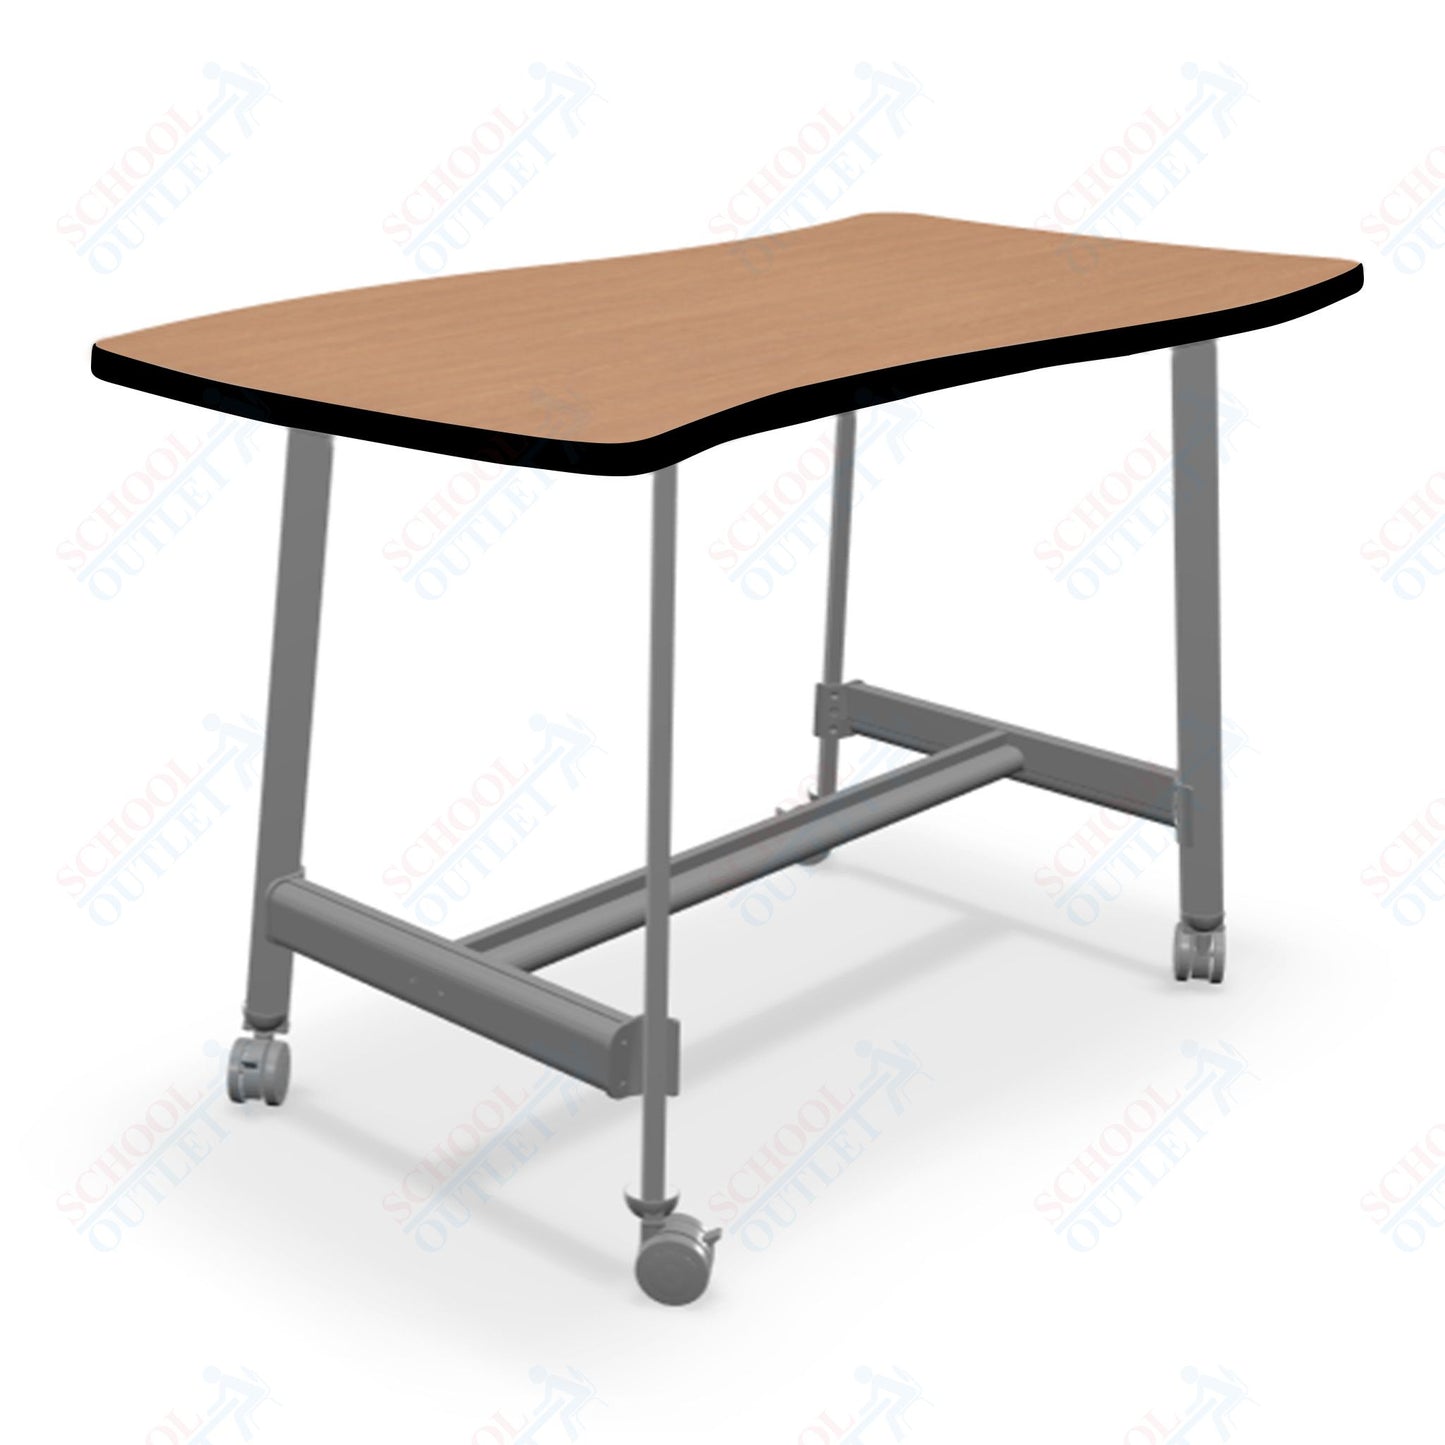 Mooreco Akt Table – Wavy Rectangle, Laminate Top, Fixed Height Available in 29"H, 36"H, or 42"H